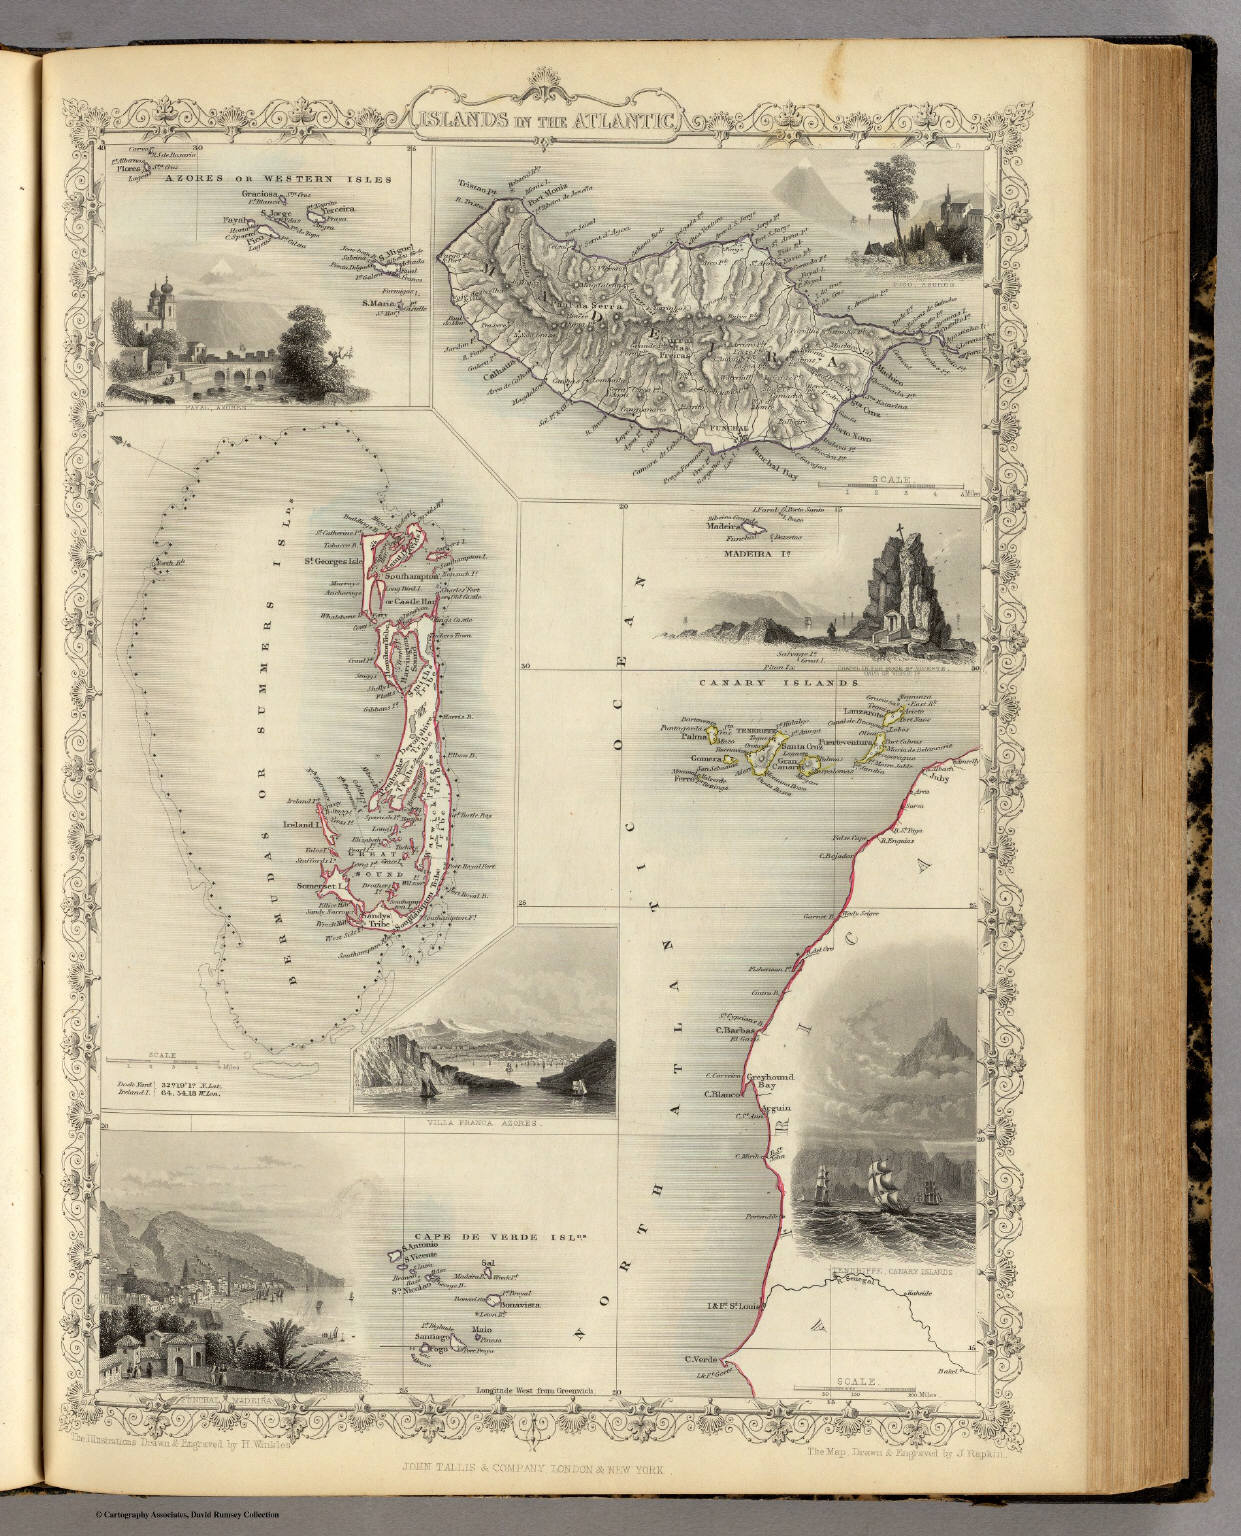 Islands In The Atlantic David Rumsey Historical Map Collection